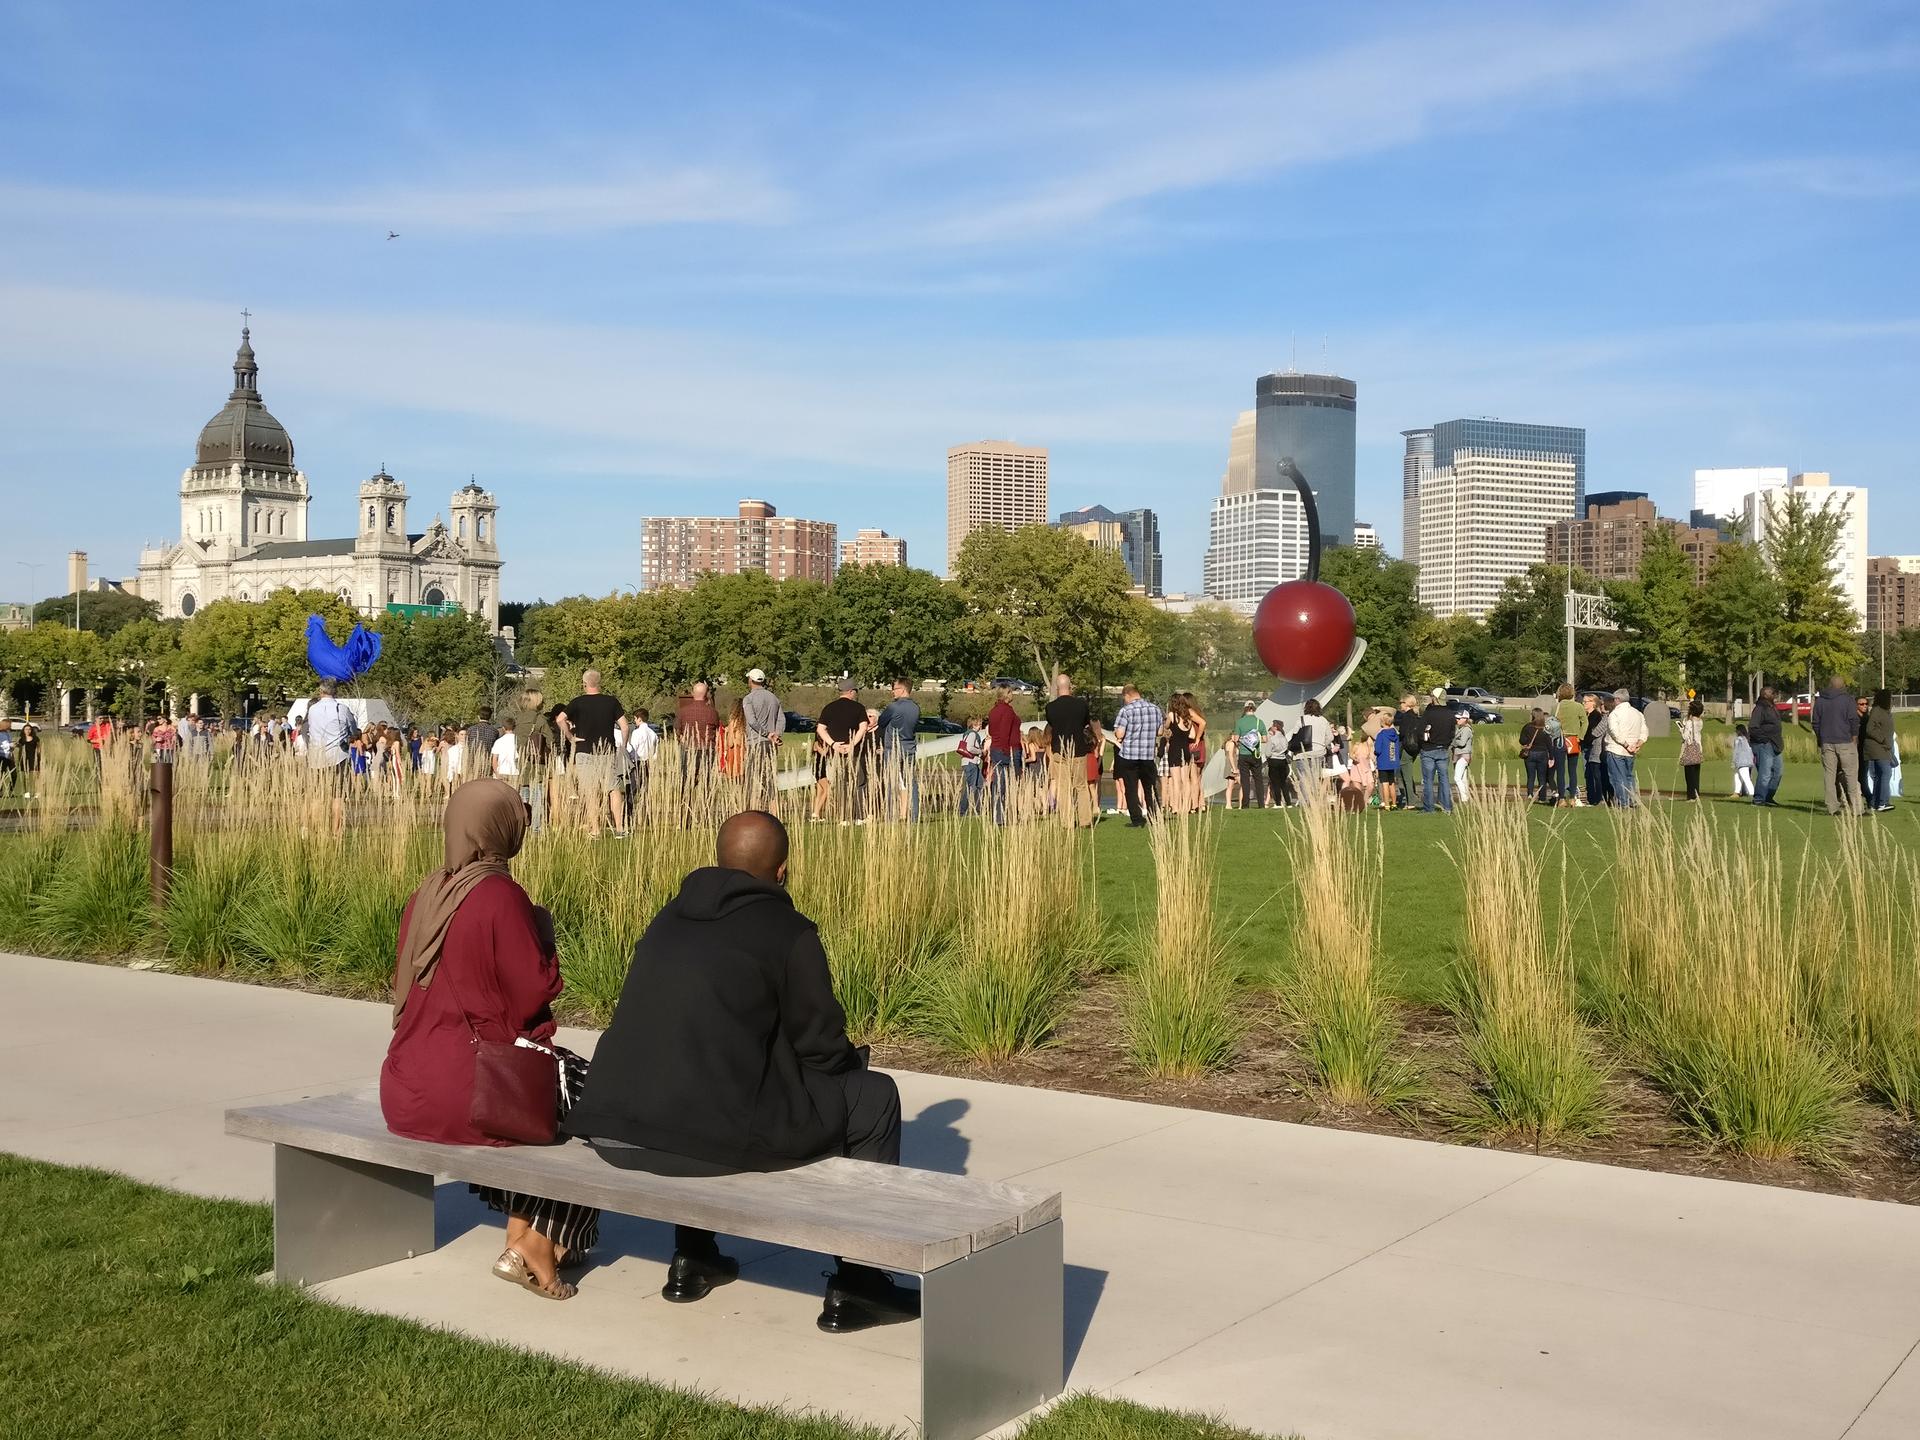 Couple sits on bench facing large statue of cherry in spoon, other milling around on grass